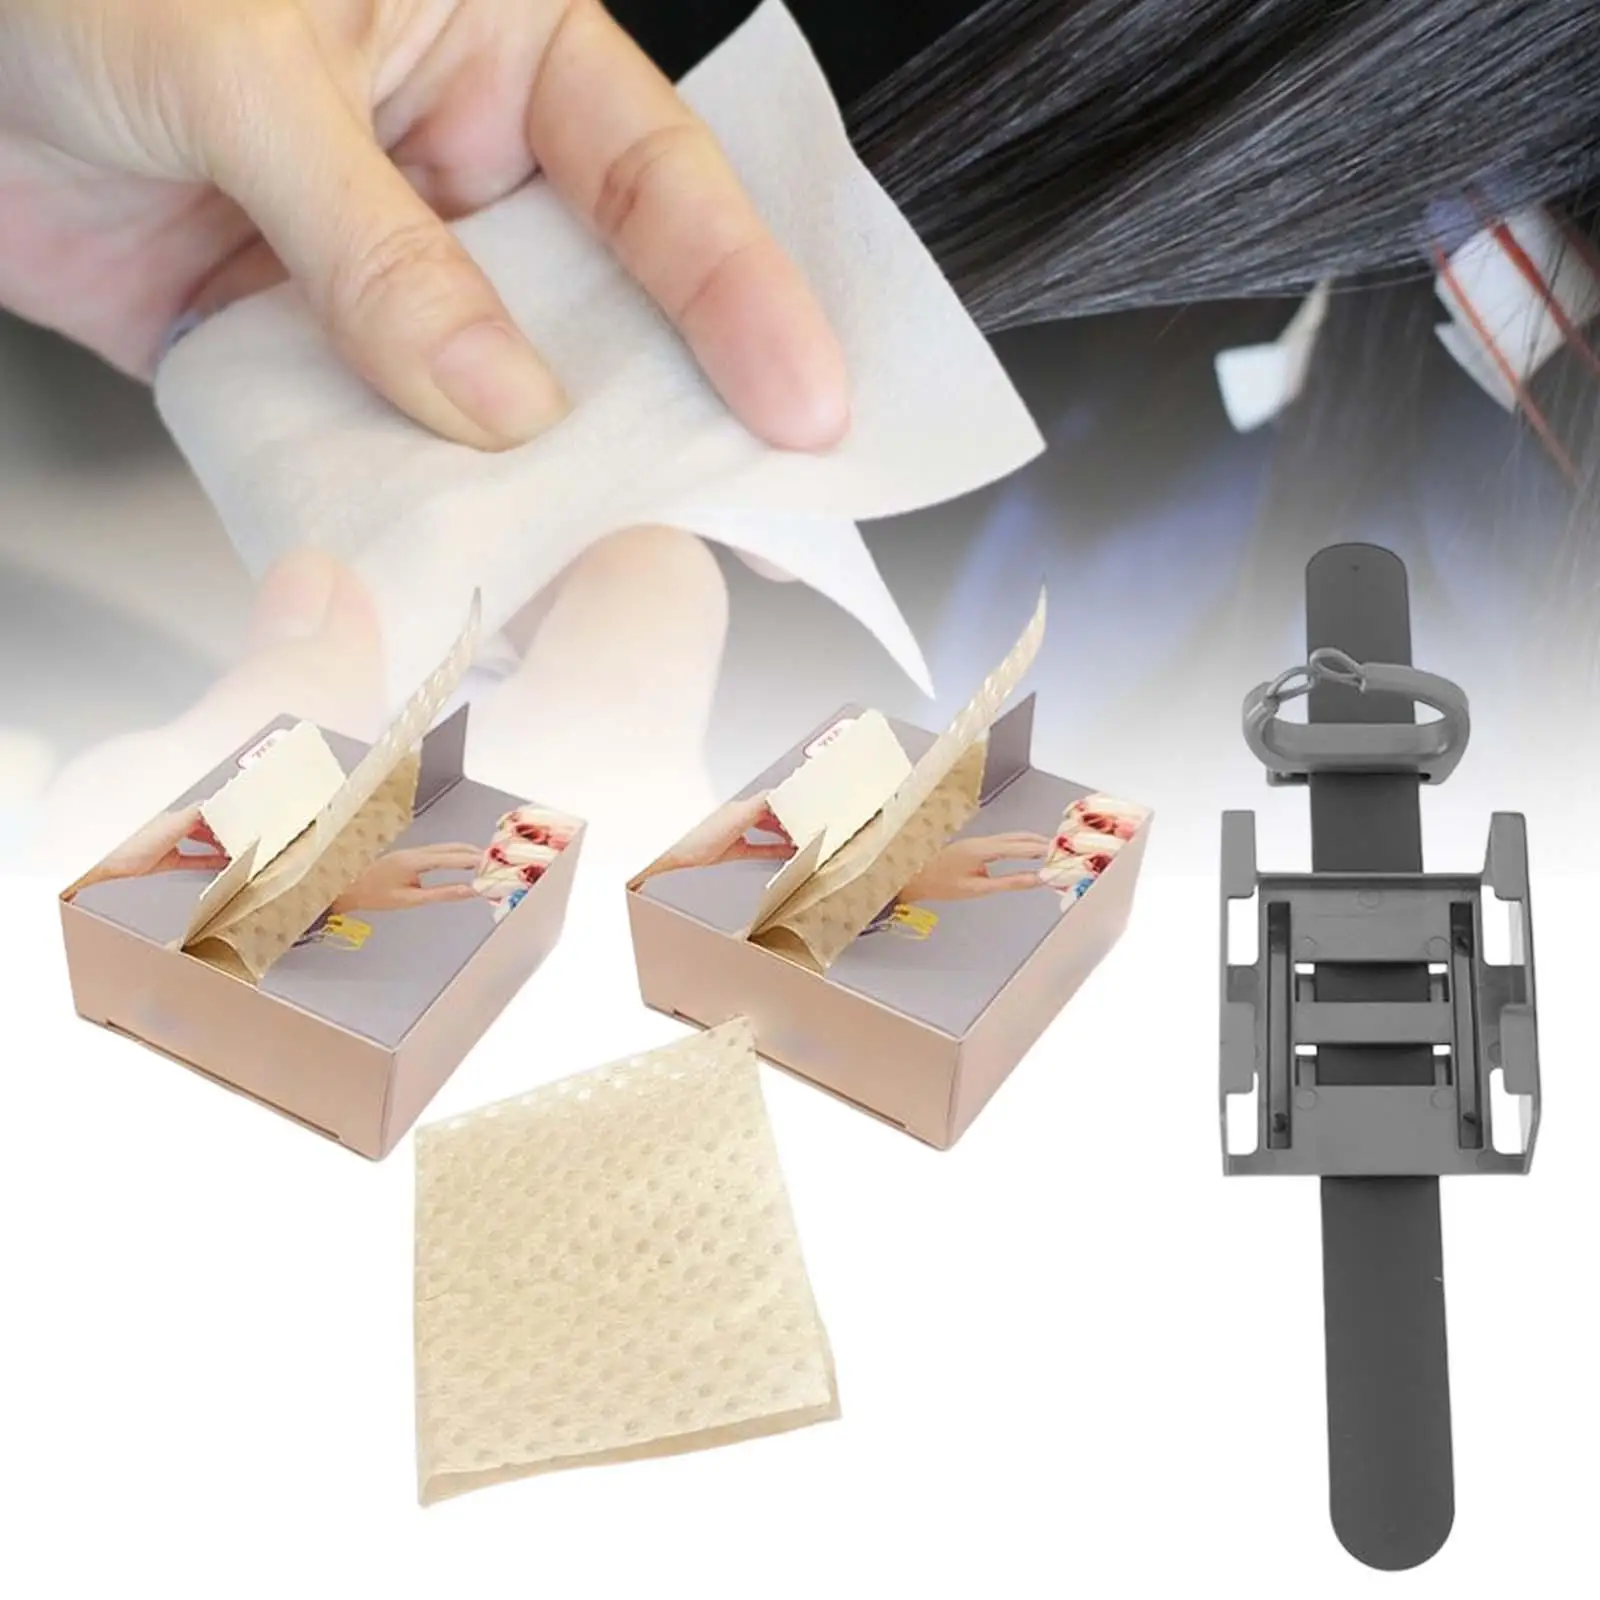 Hair Perms Paper Self Dispensing Box Accessory Easy to Use Professional